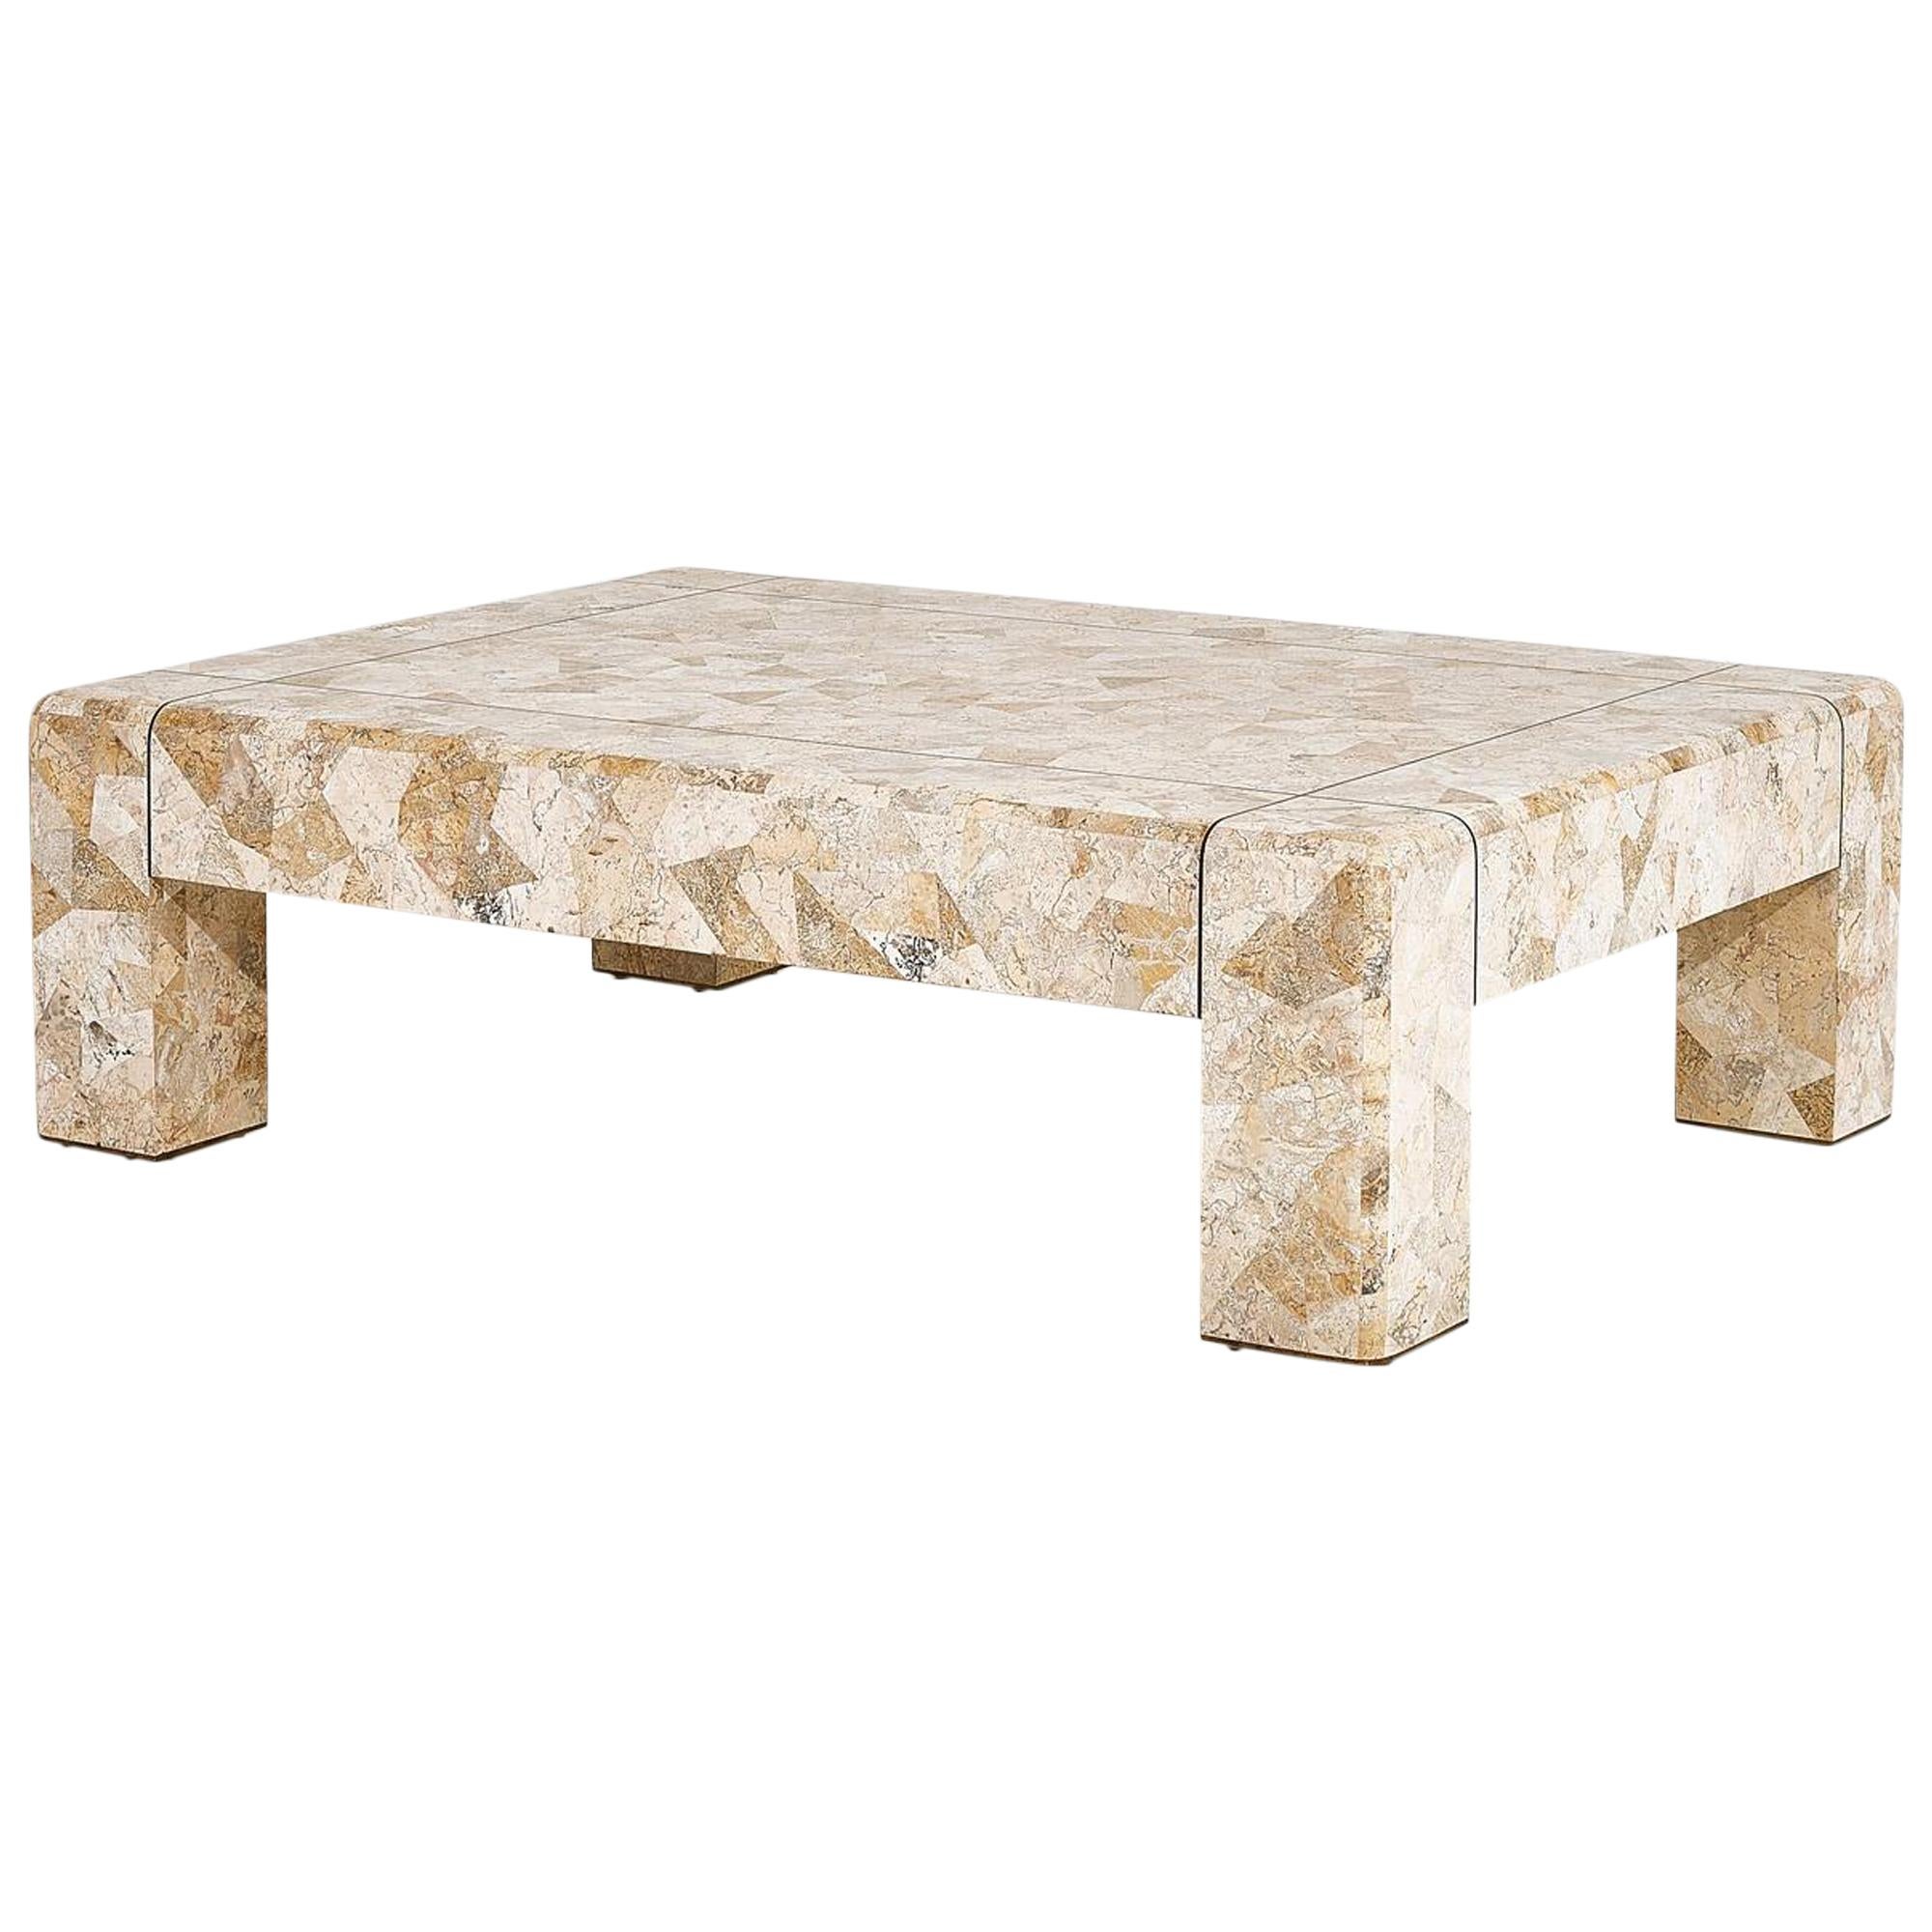 Karl Springer Brass and Tessellated Travertine Coffee Table, 1970